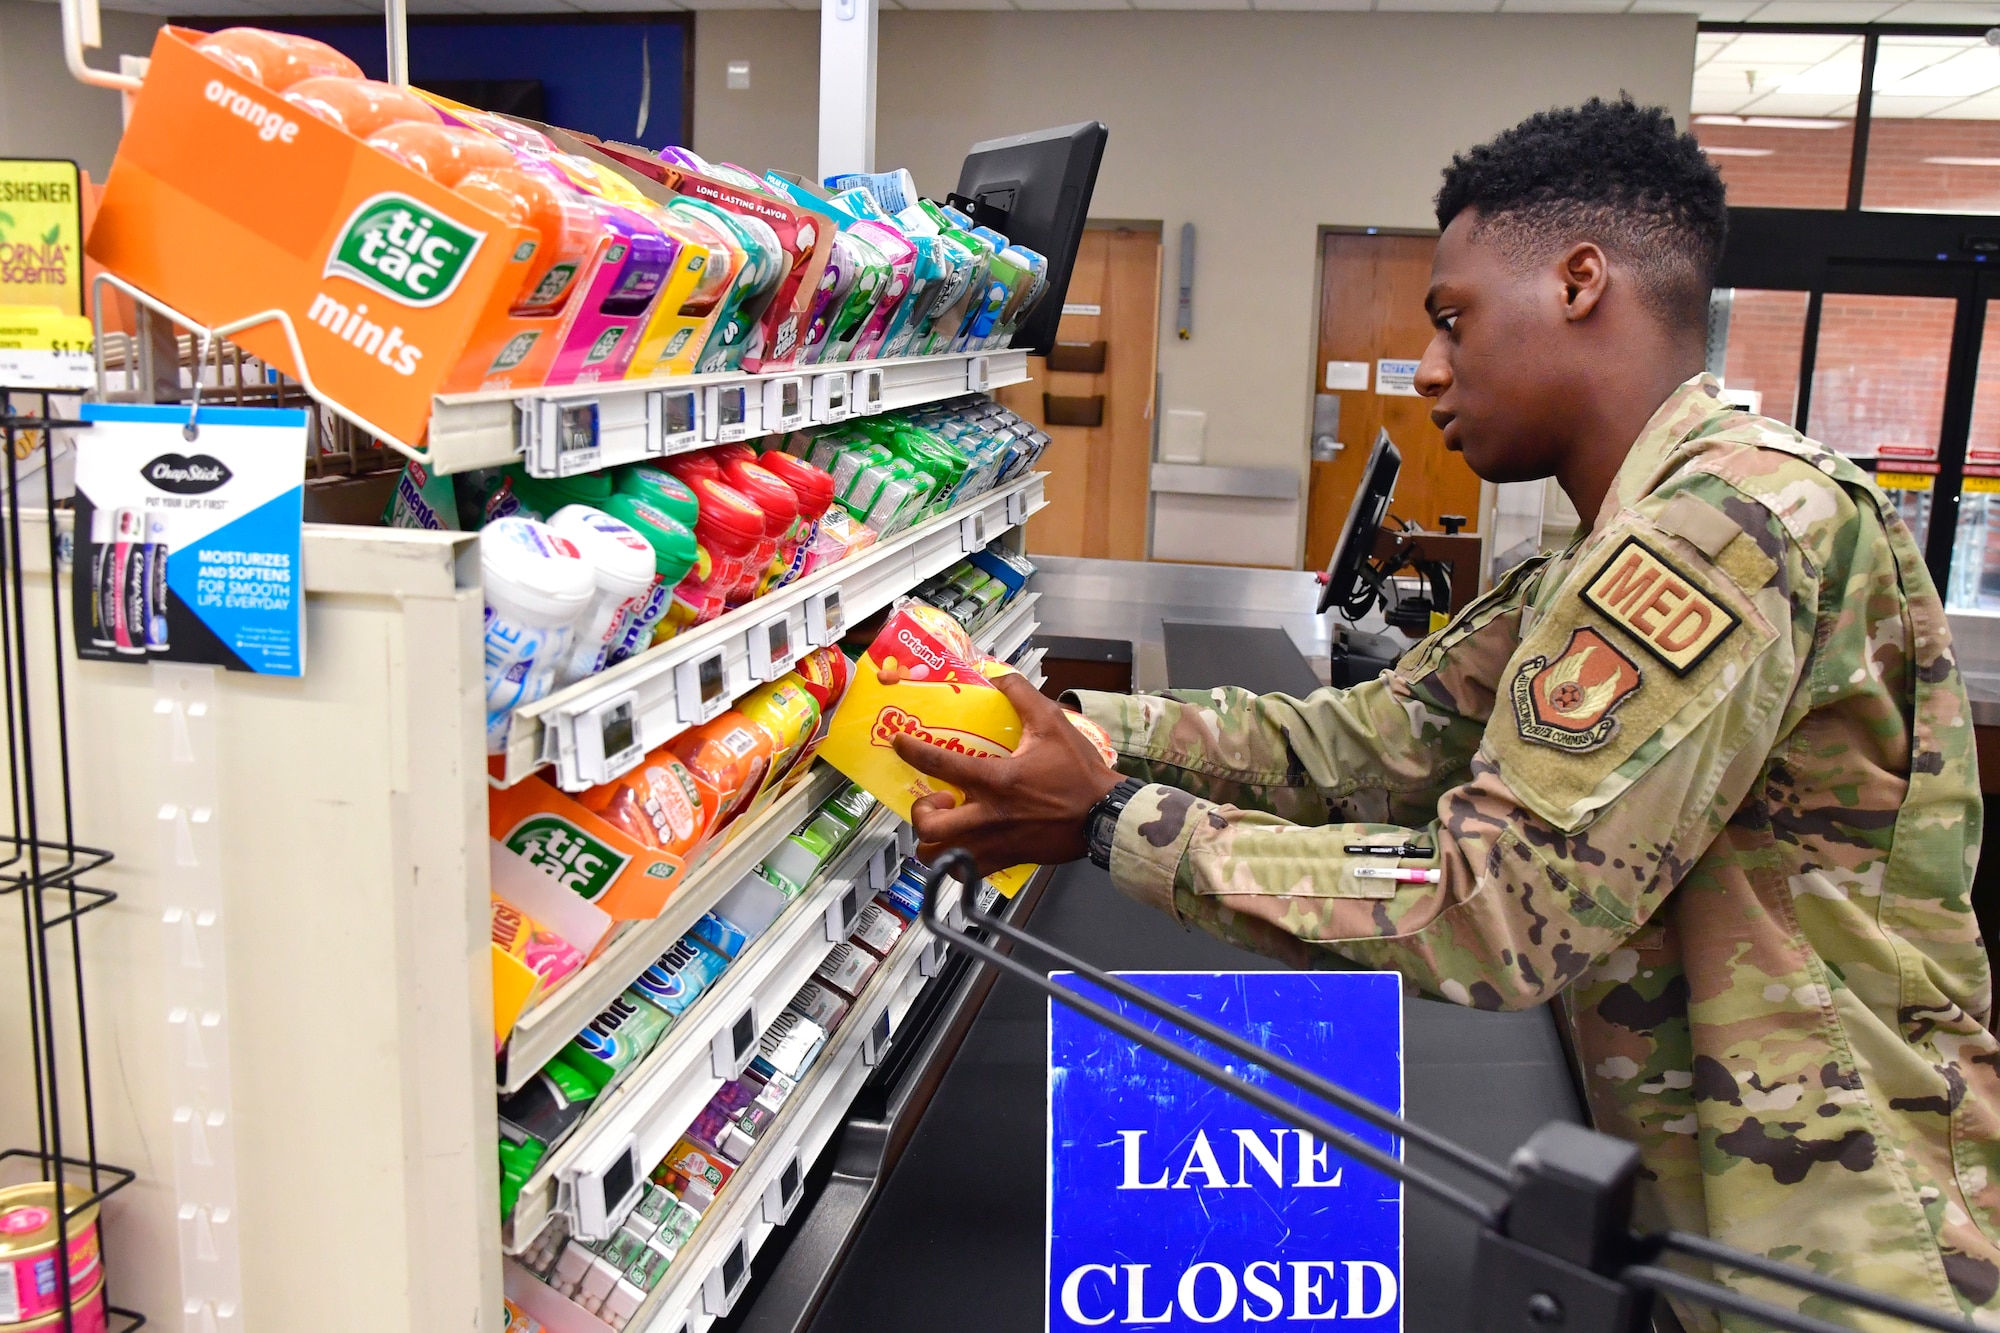 Airman 1st Class Ladarius Musonda, 75th Operational Readiness Medical Squadron, stocks shelves at the base Commissary July 26, 2022, at Hill Air Force Base, Utah. Organized by the Air Force Sergeants Associations Chapter 1163, Airmen from across the installation have been volunteering to restock shelves at the store. (U.S. Air Force photo by Todd Cromar)